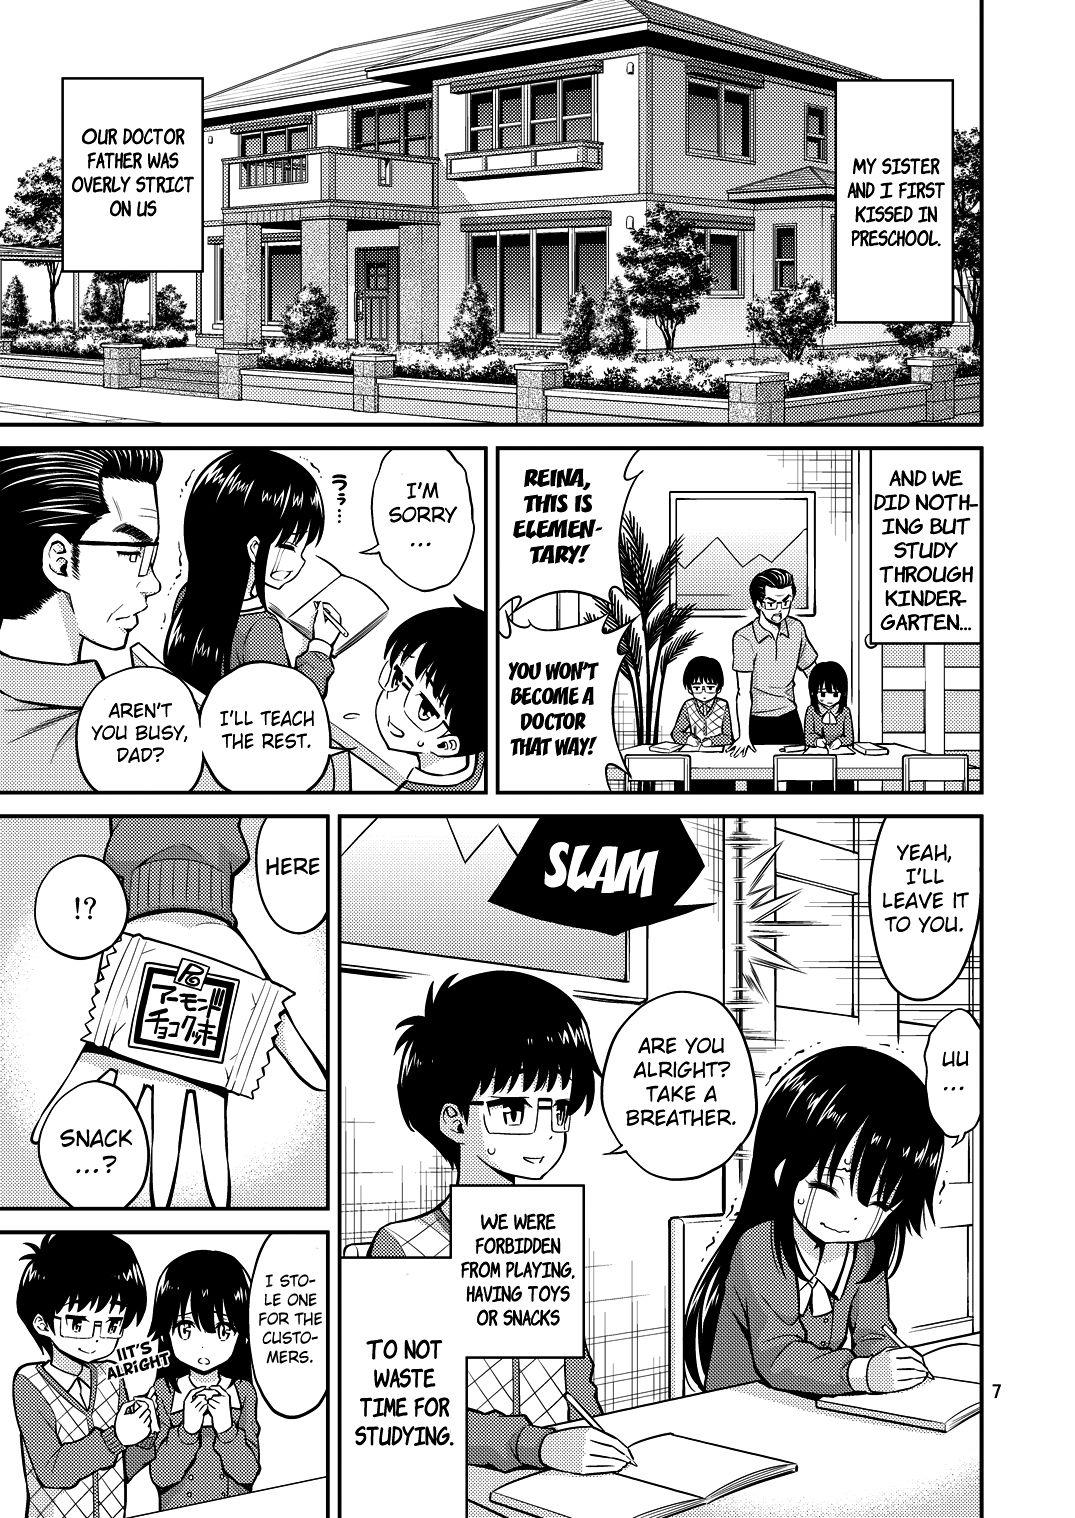 Swallowing Imouto to Uchi Kiss | Kissing in the House with Little Sister - Original Black Woman - Page 7